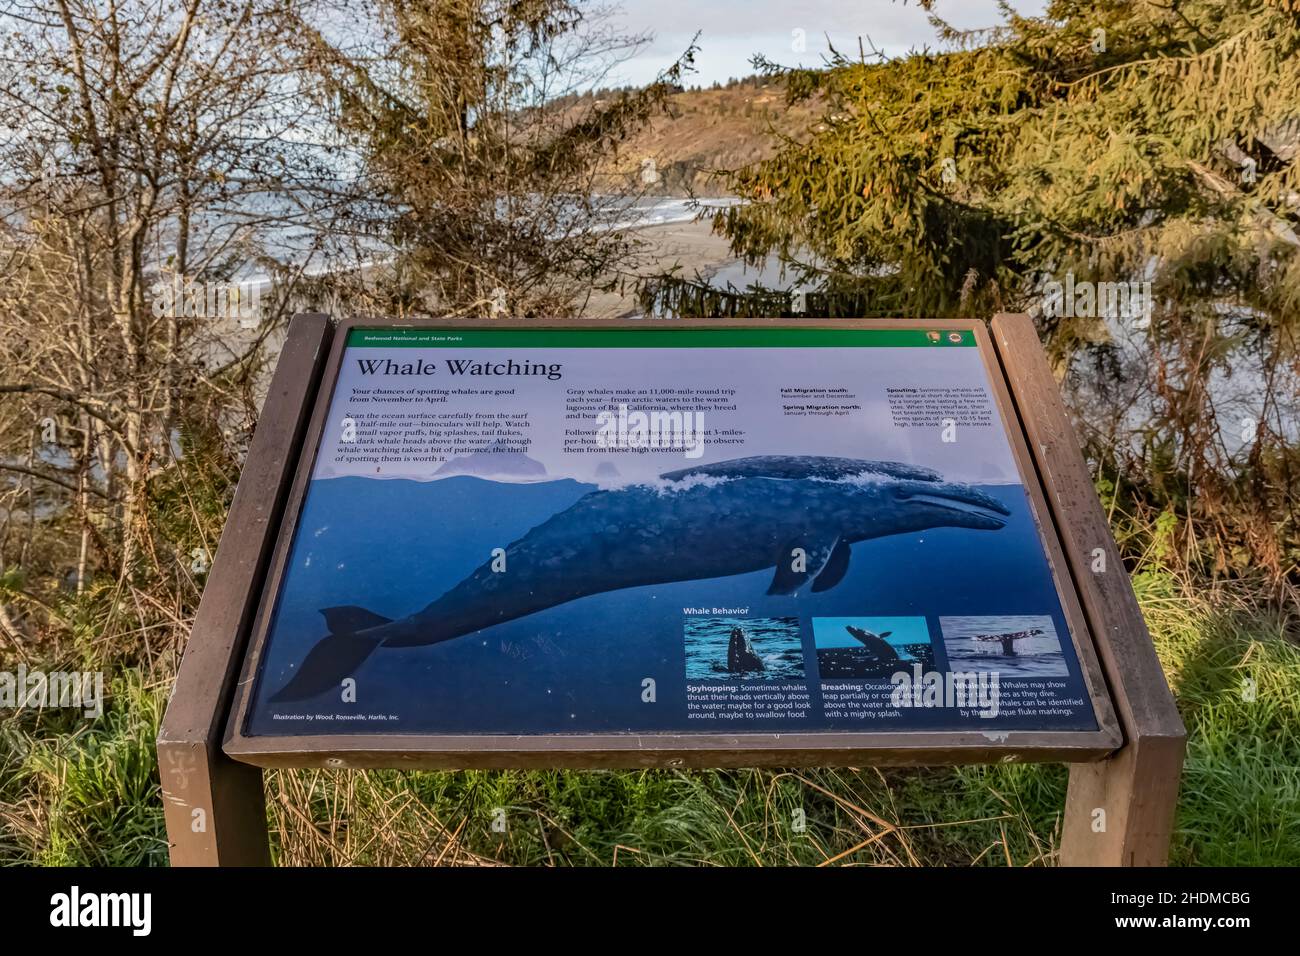 Whale Watching interpretative sign near mouth of Klamath River in Redwood National and State Parks, California, USA Stockfoto